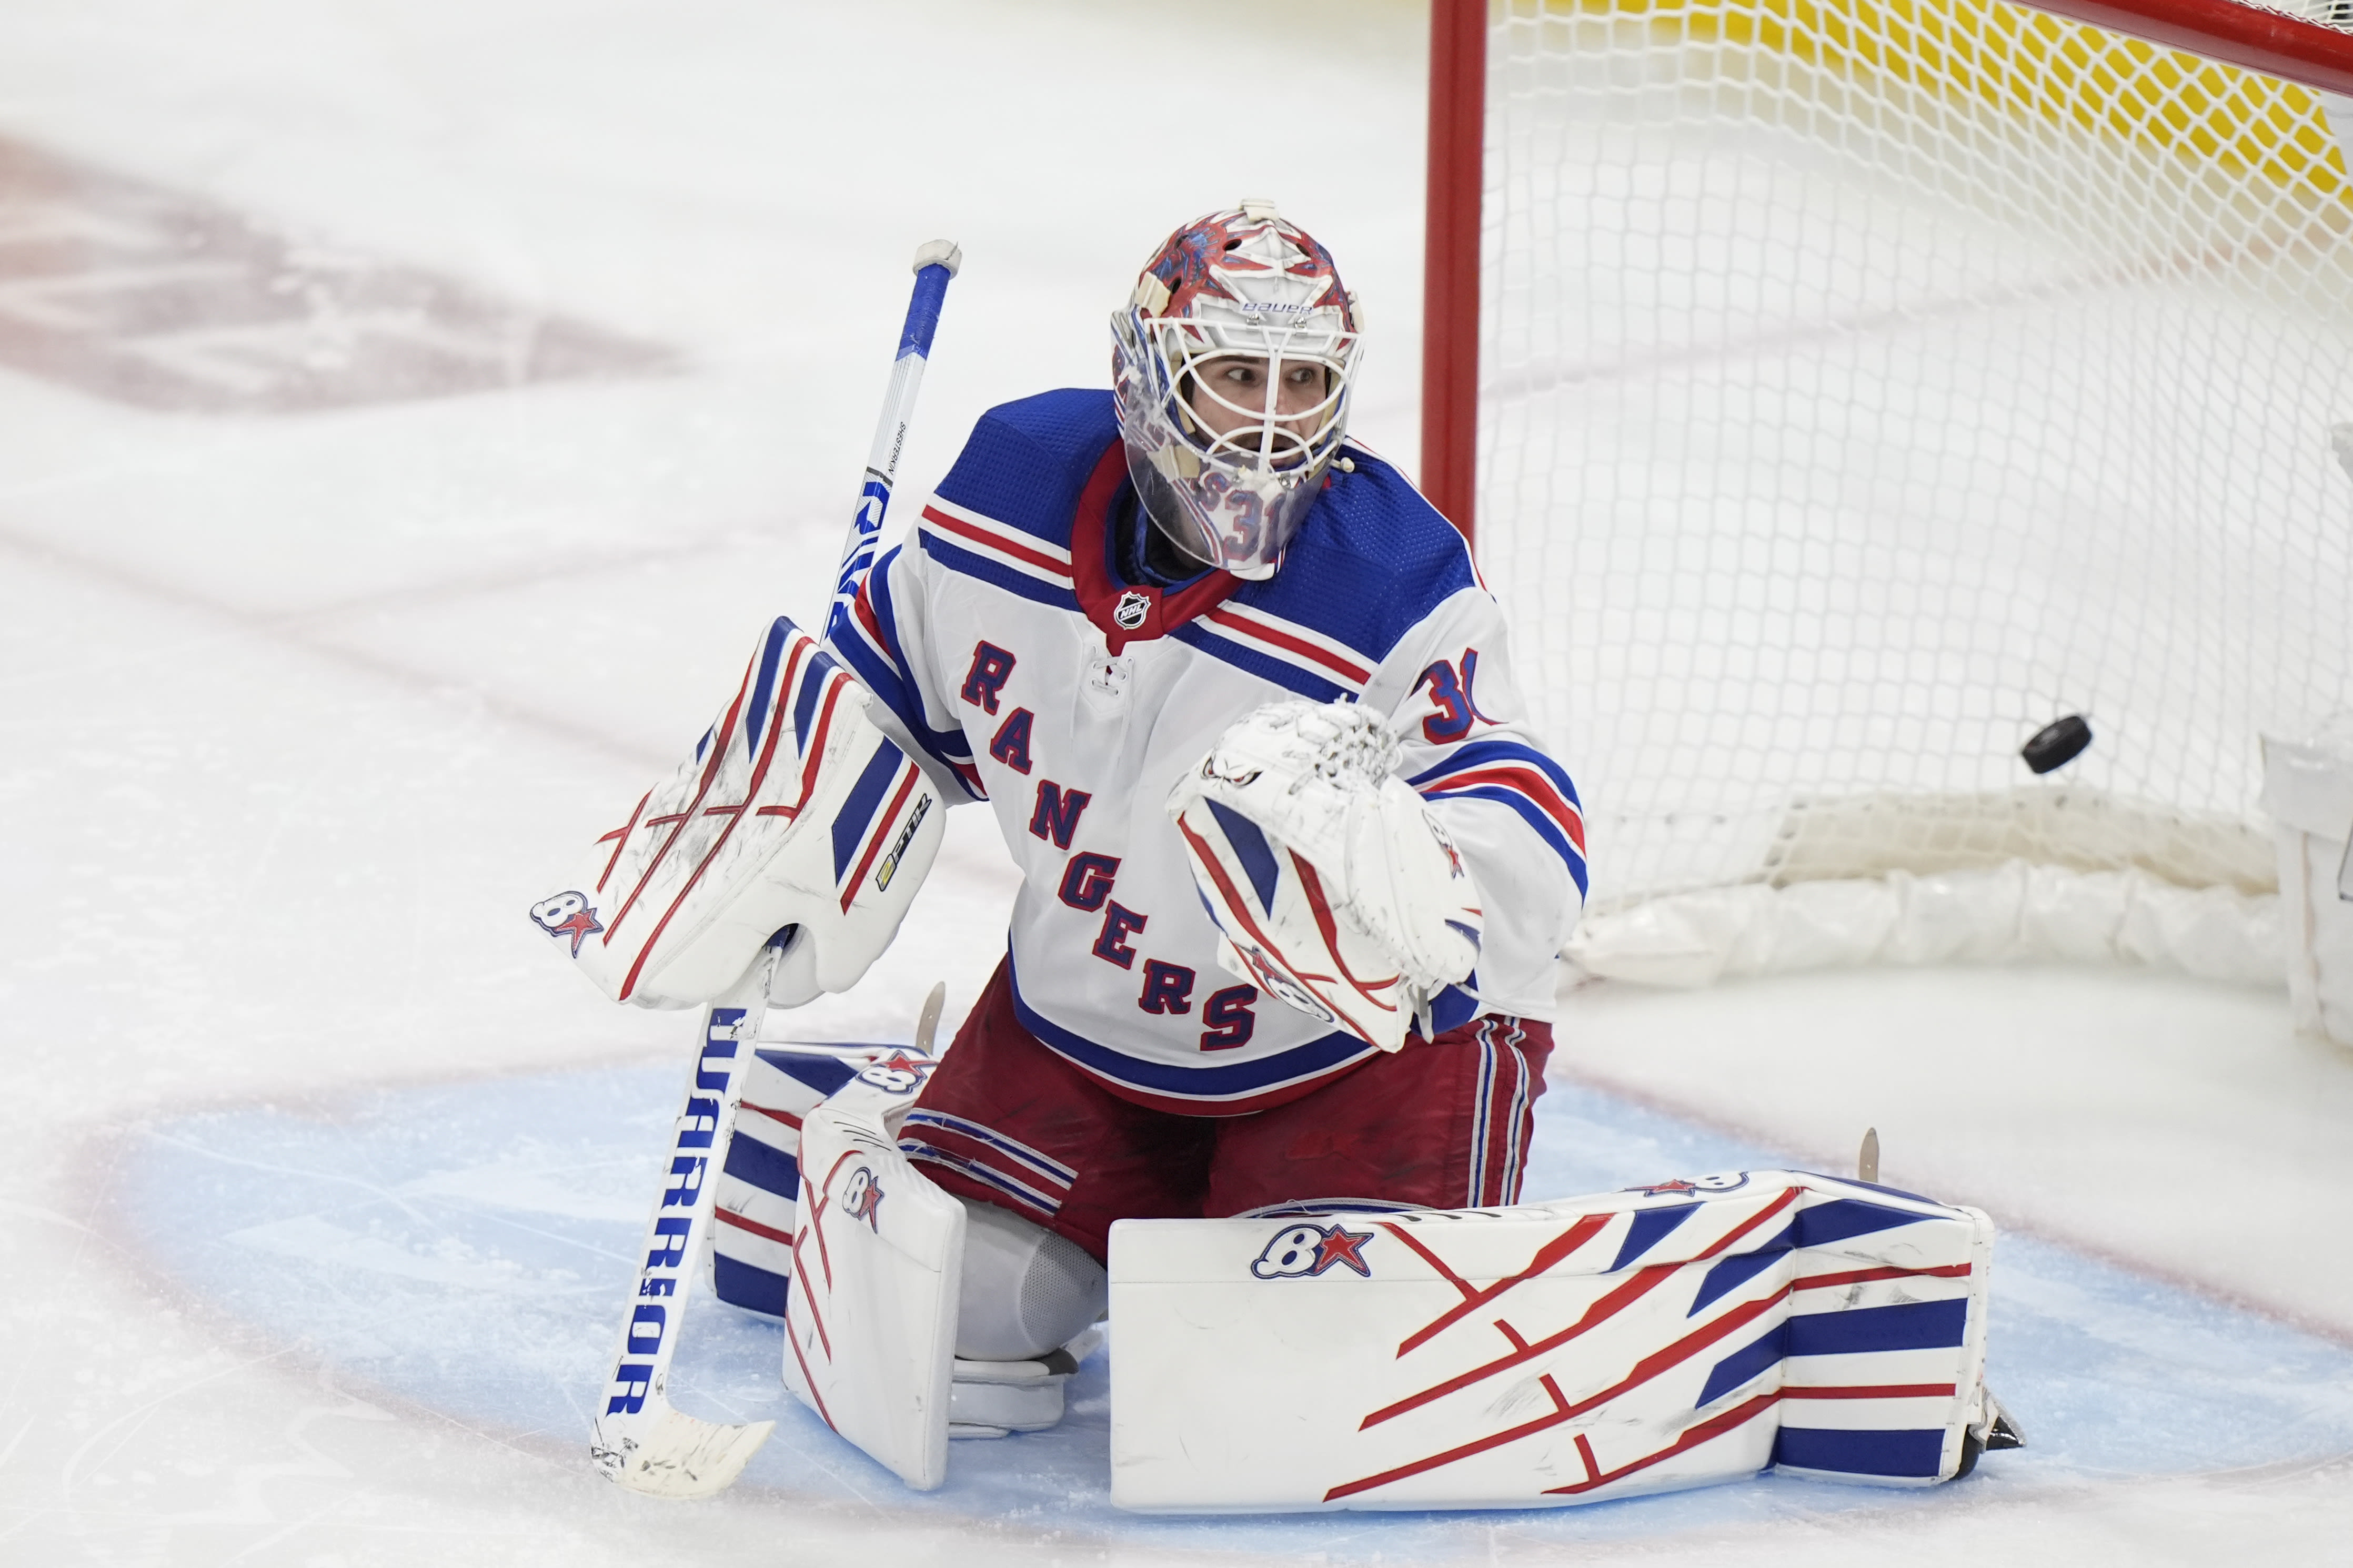 Rangers can't capitalize on another dominant Shesterkin performance, drop Game 4 of East Finals